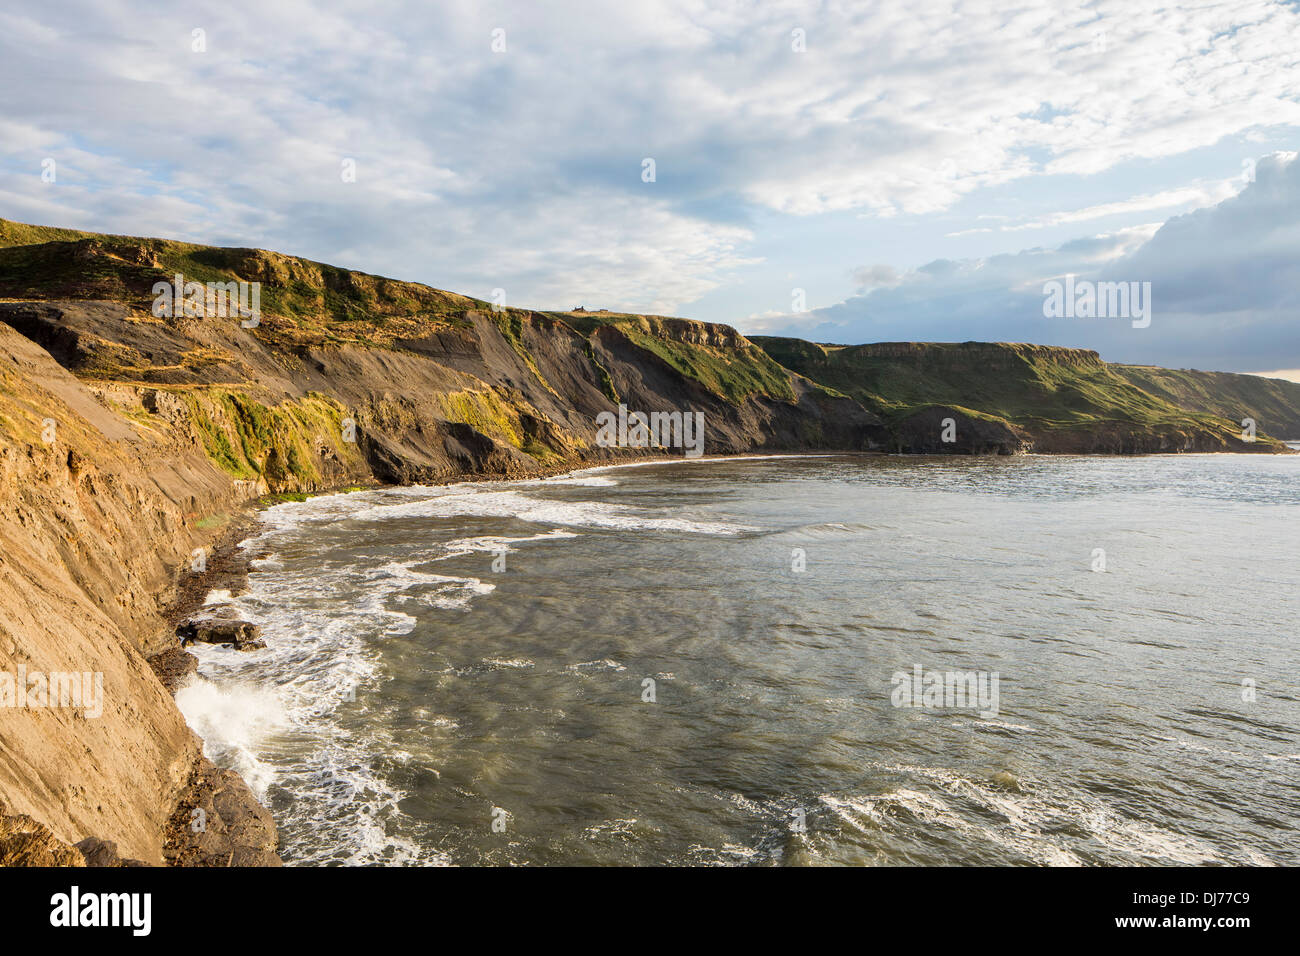 Sea cliffs at kettleness, North Yorkshire. Stock Photo